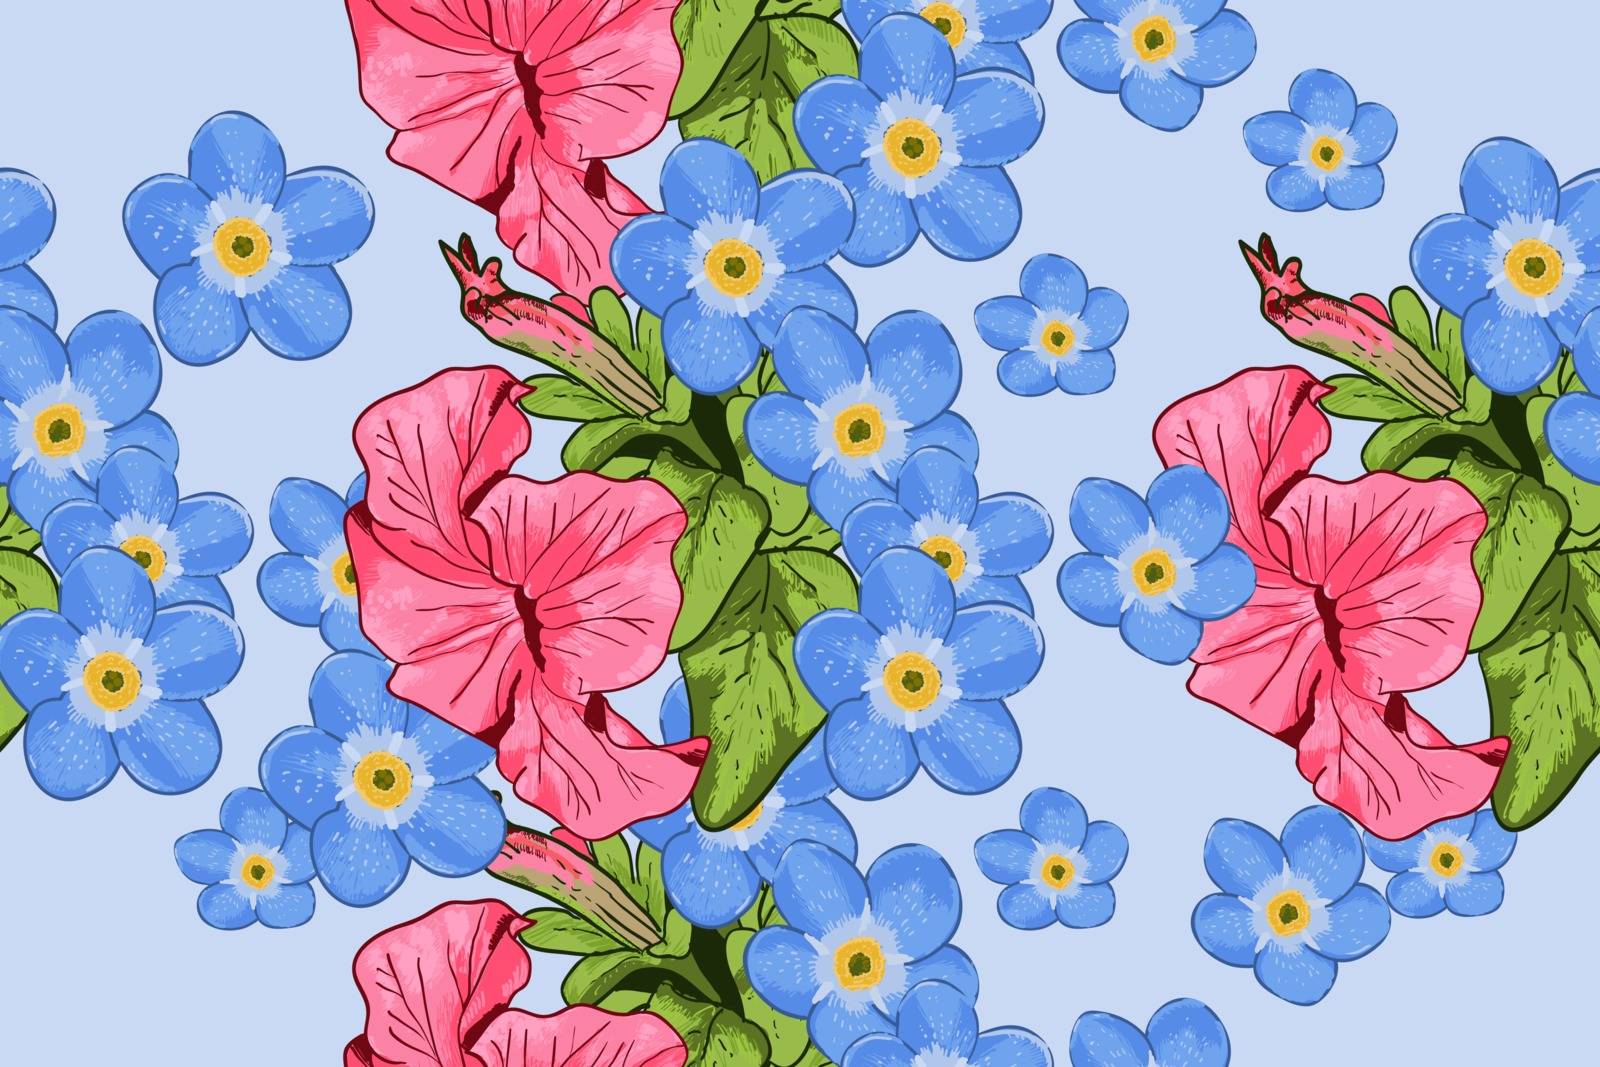 Wildflowers blooming delicate forget-me-not flowers  background. Vector illustration